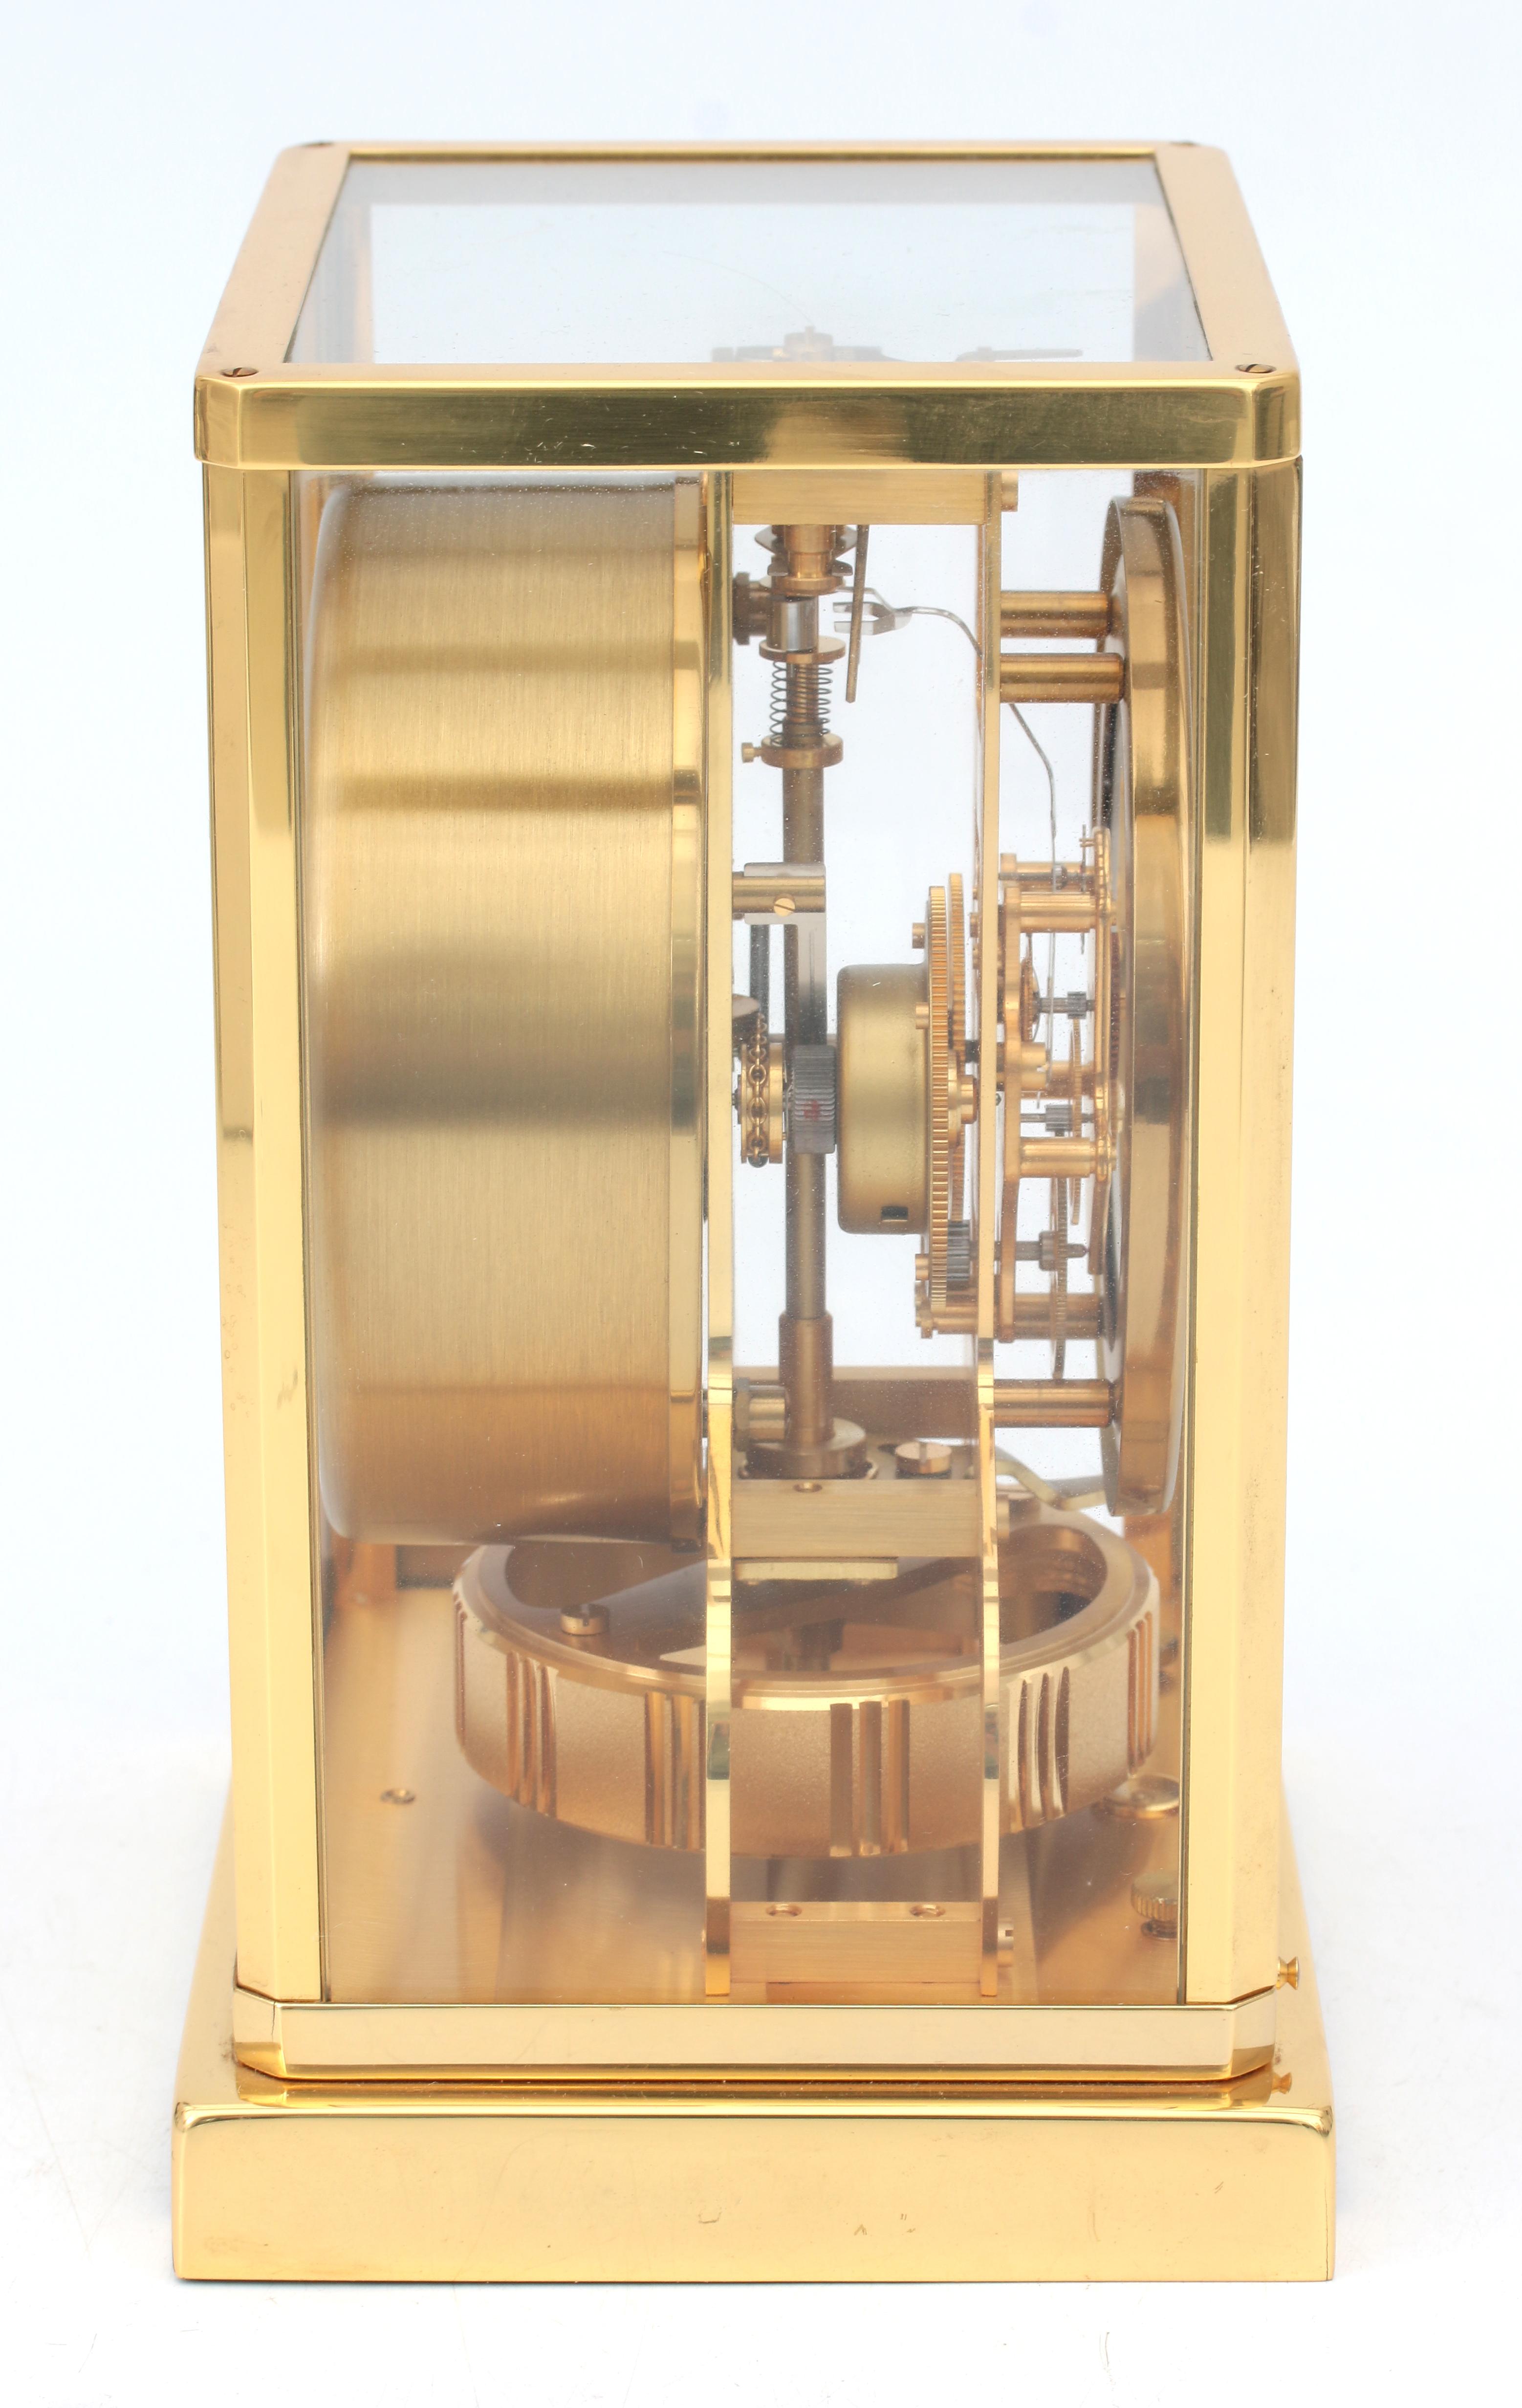 A perpetuum moving clock in gold-plated metal and glass case, Jaeger leCoultre, Swizerland, circa 19 - Image 4 of 5